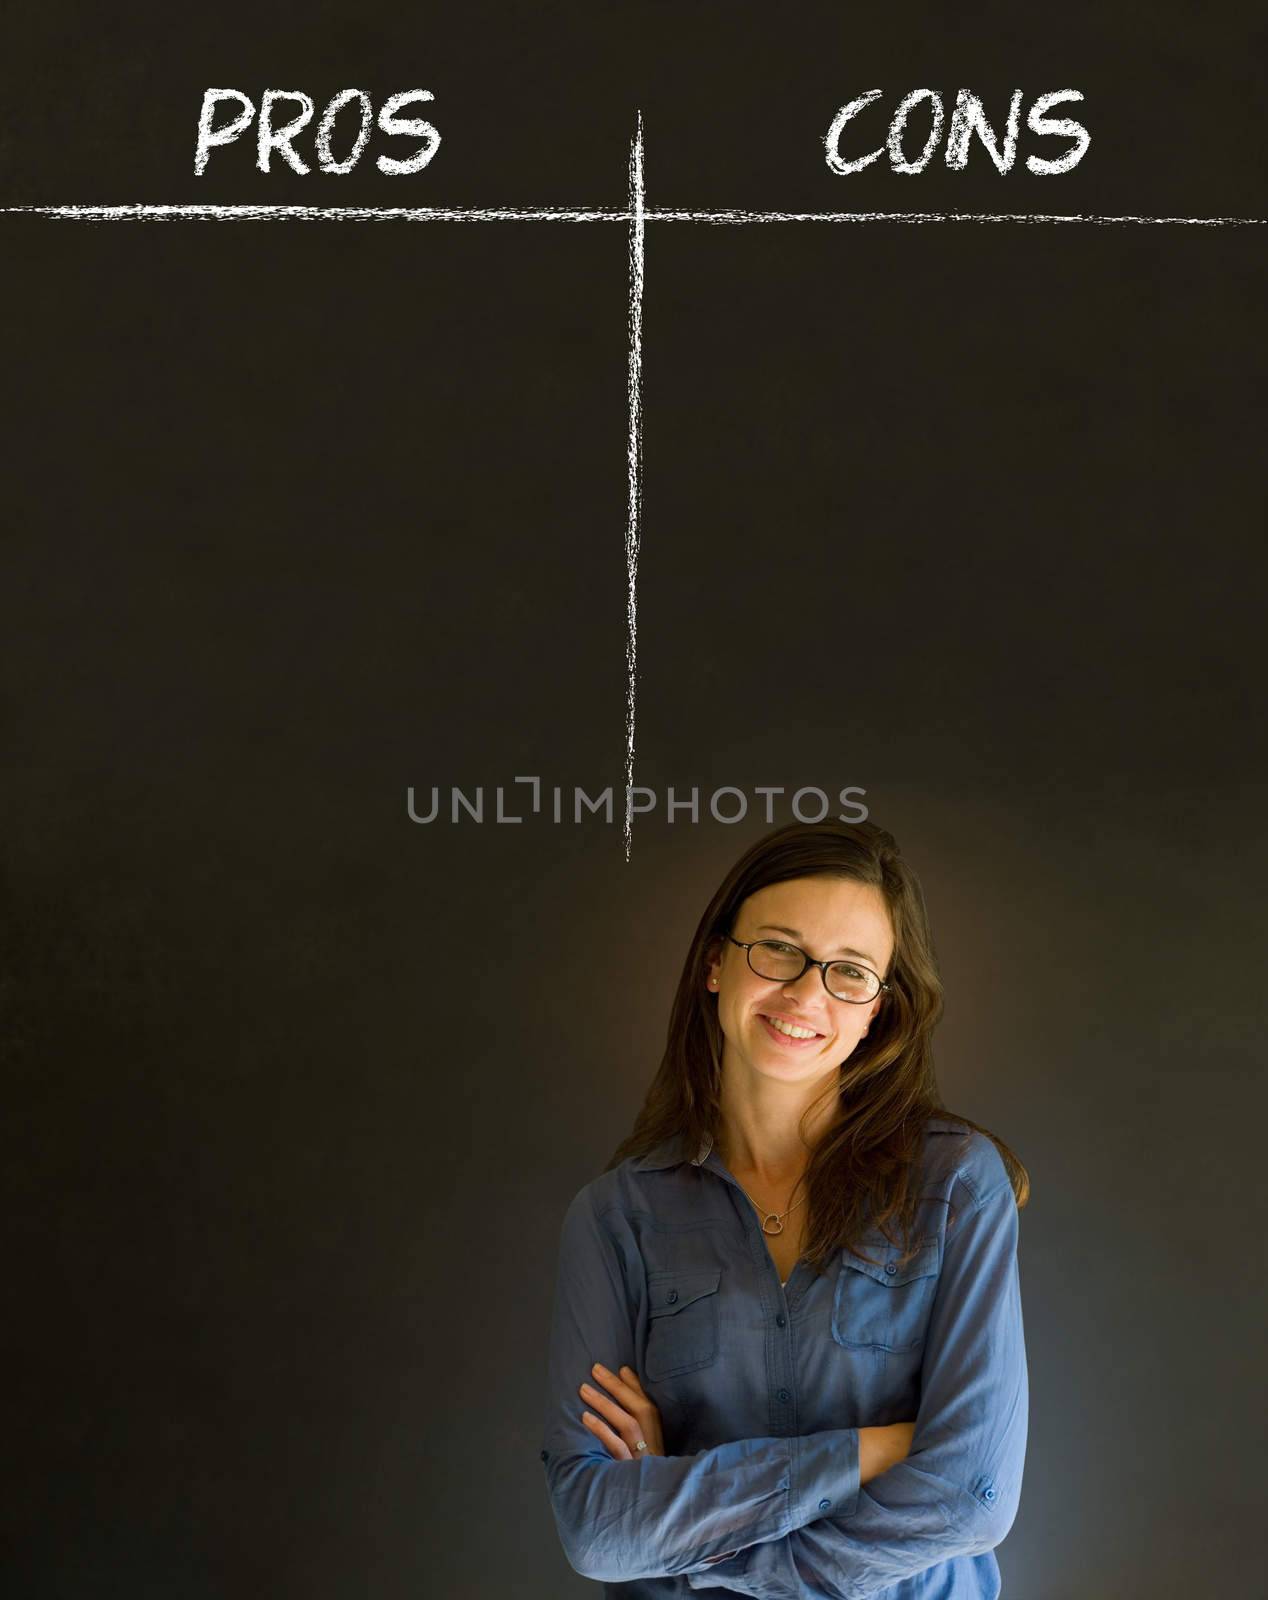 Businesswoman, student or teacher thinking pros and cons decision list chalk concept blackboard background